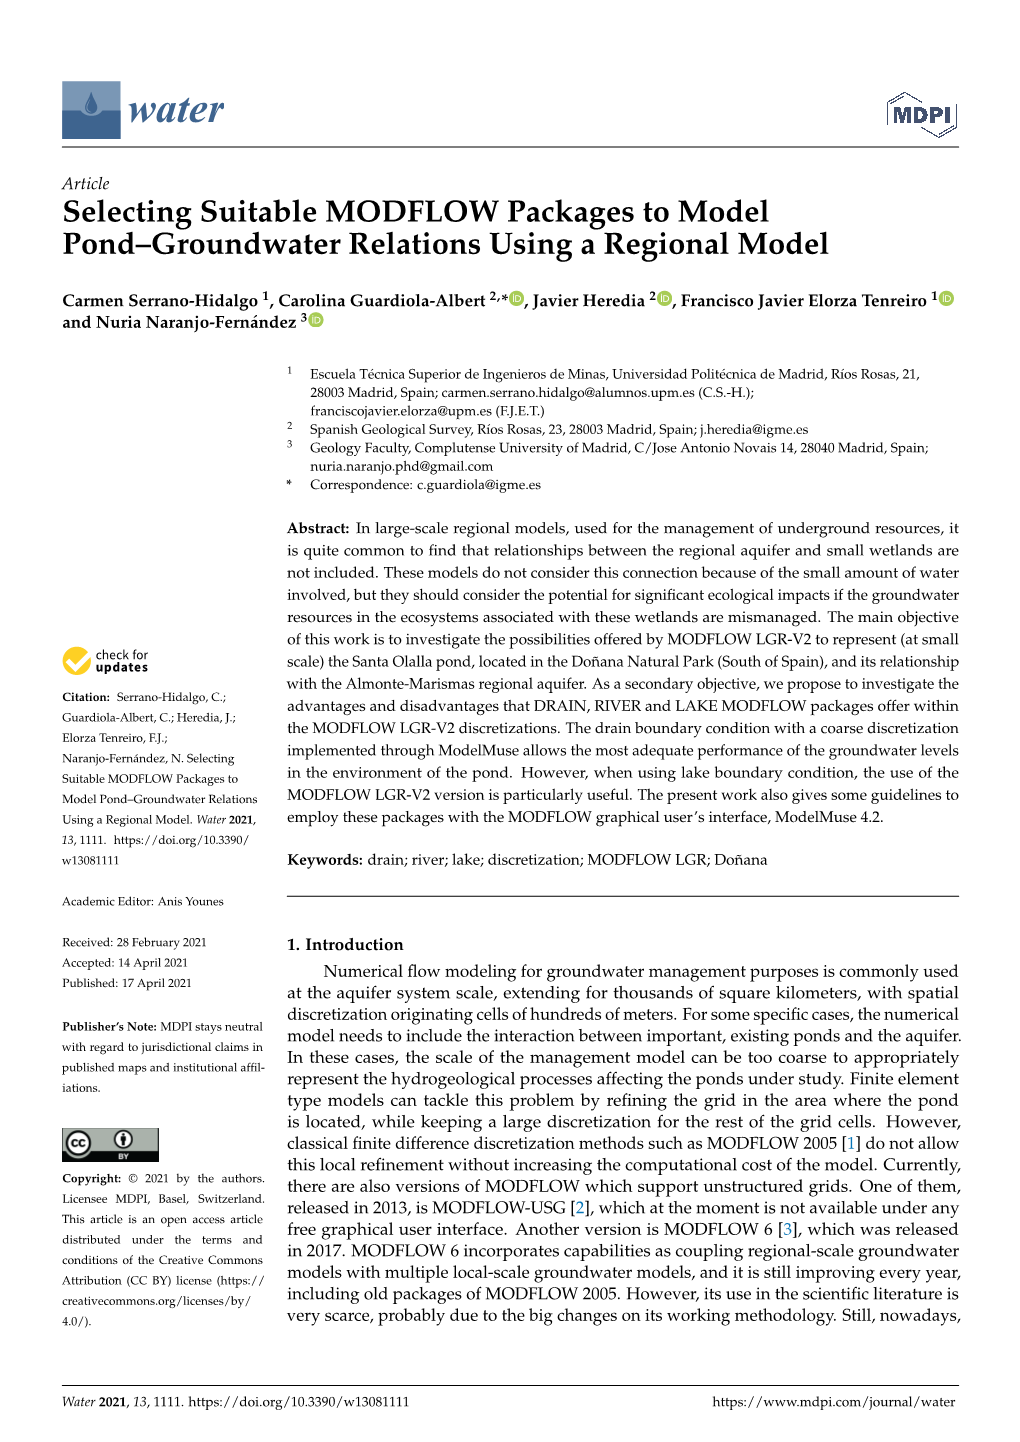 Selecting Suitable MODFLOW Packages to Model Pond–Groundwater Relations Using a Regional Model